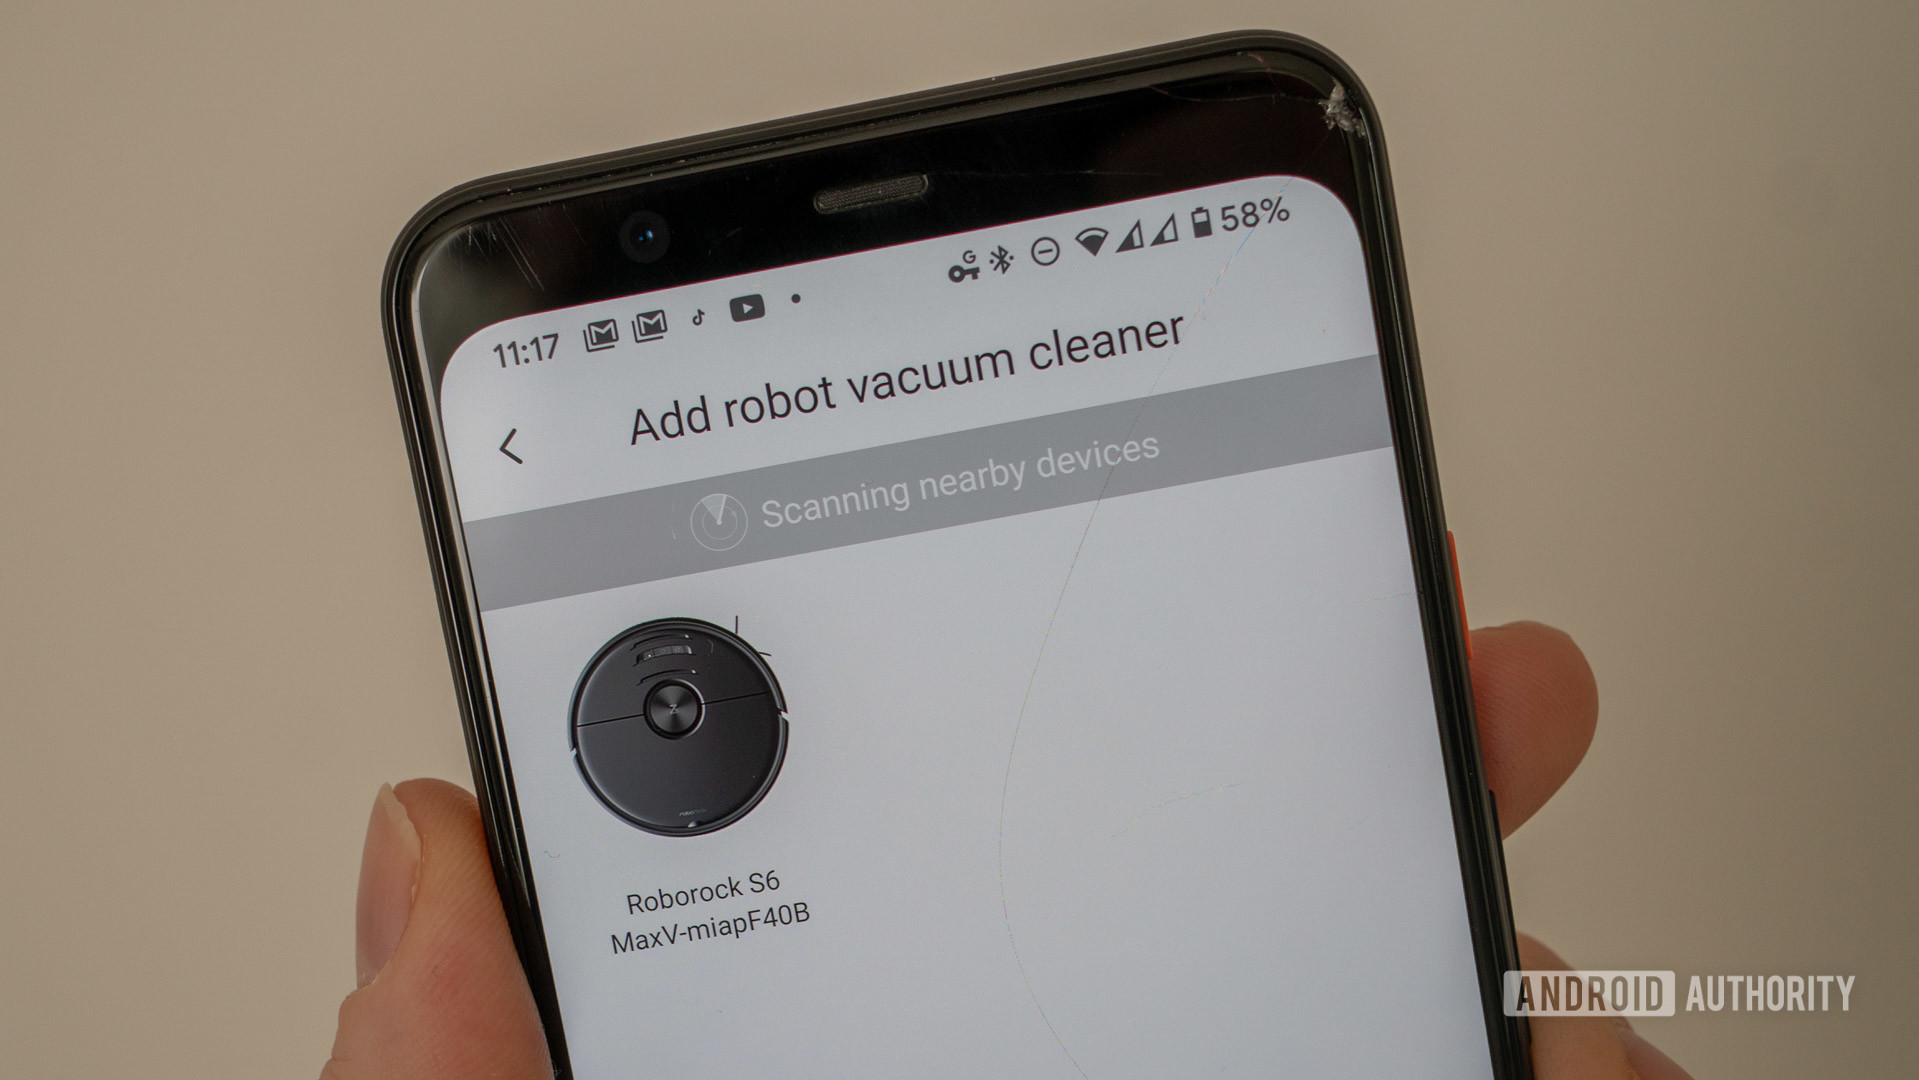 Roborock S6 MaxV connect to robot vacuum cleaner in app